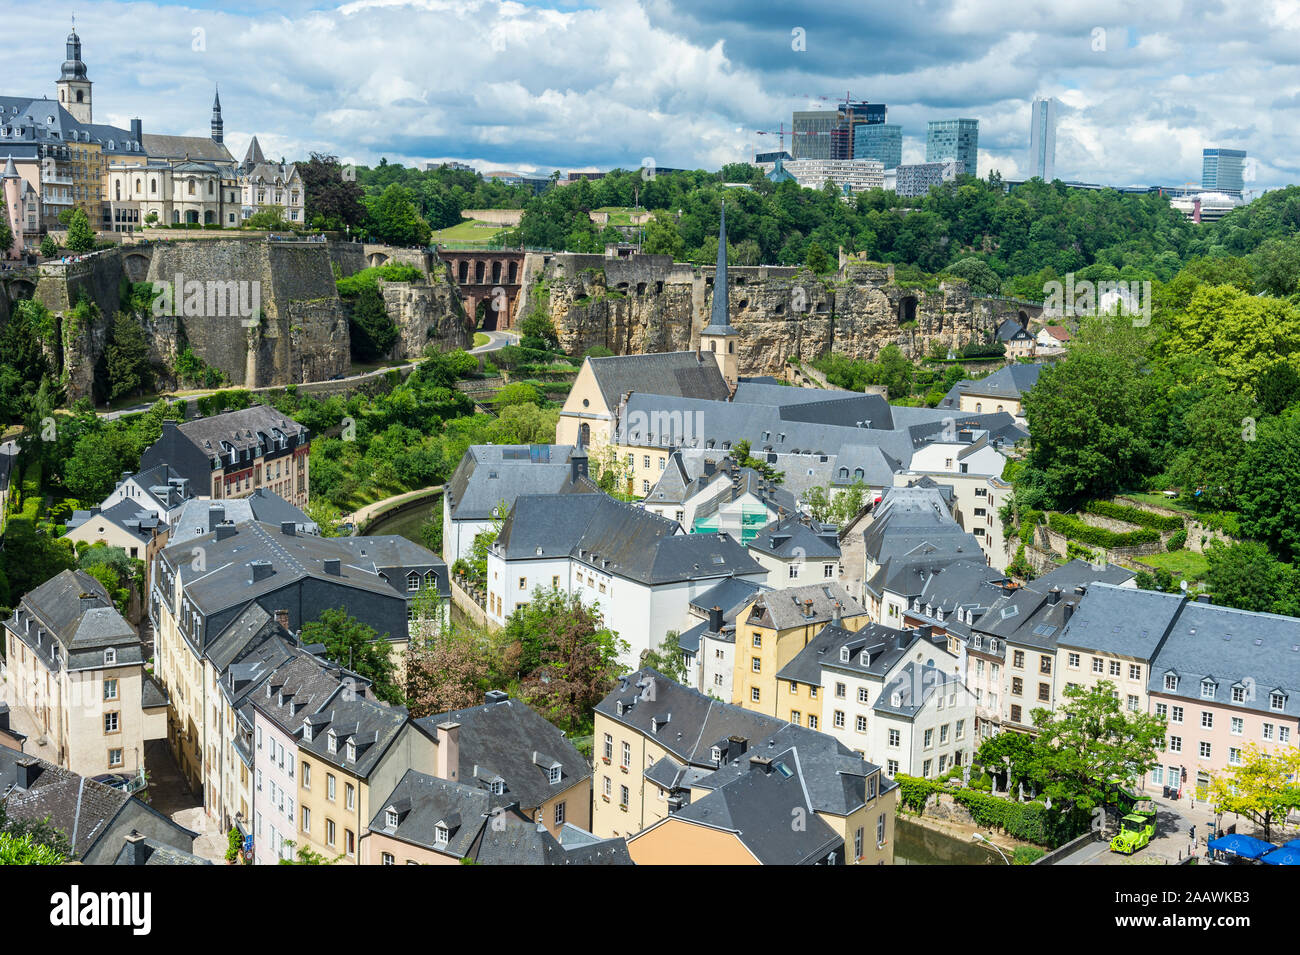 High angle view of old town in Luxembourg against cloudy sky Stock Photo